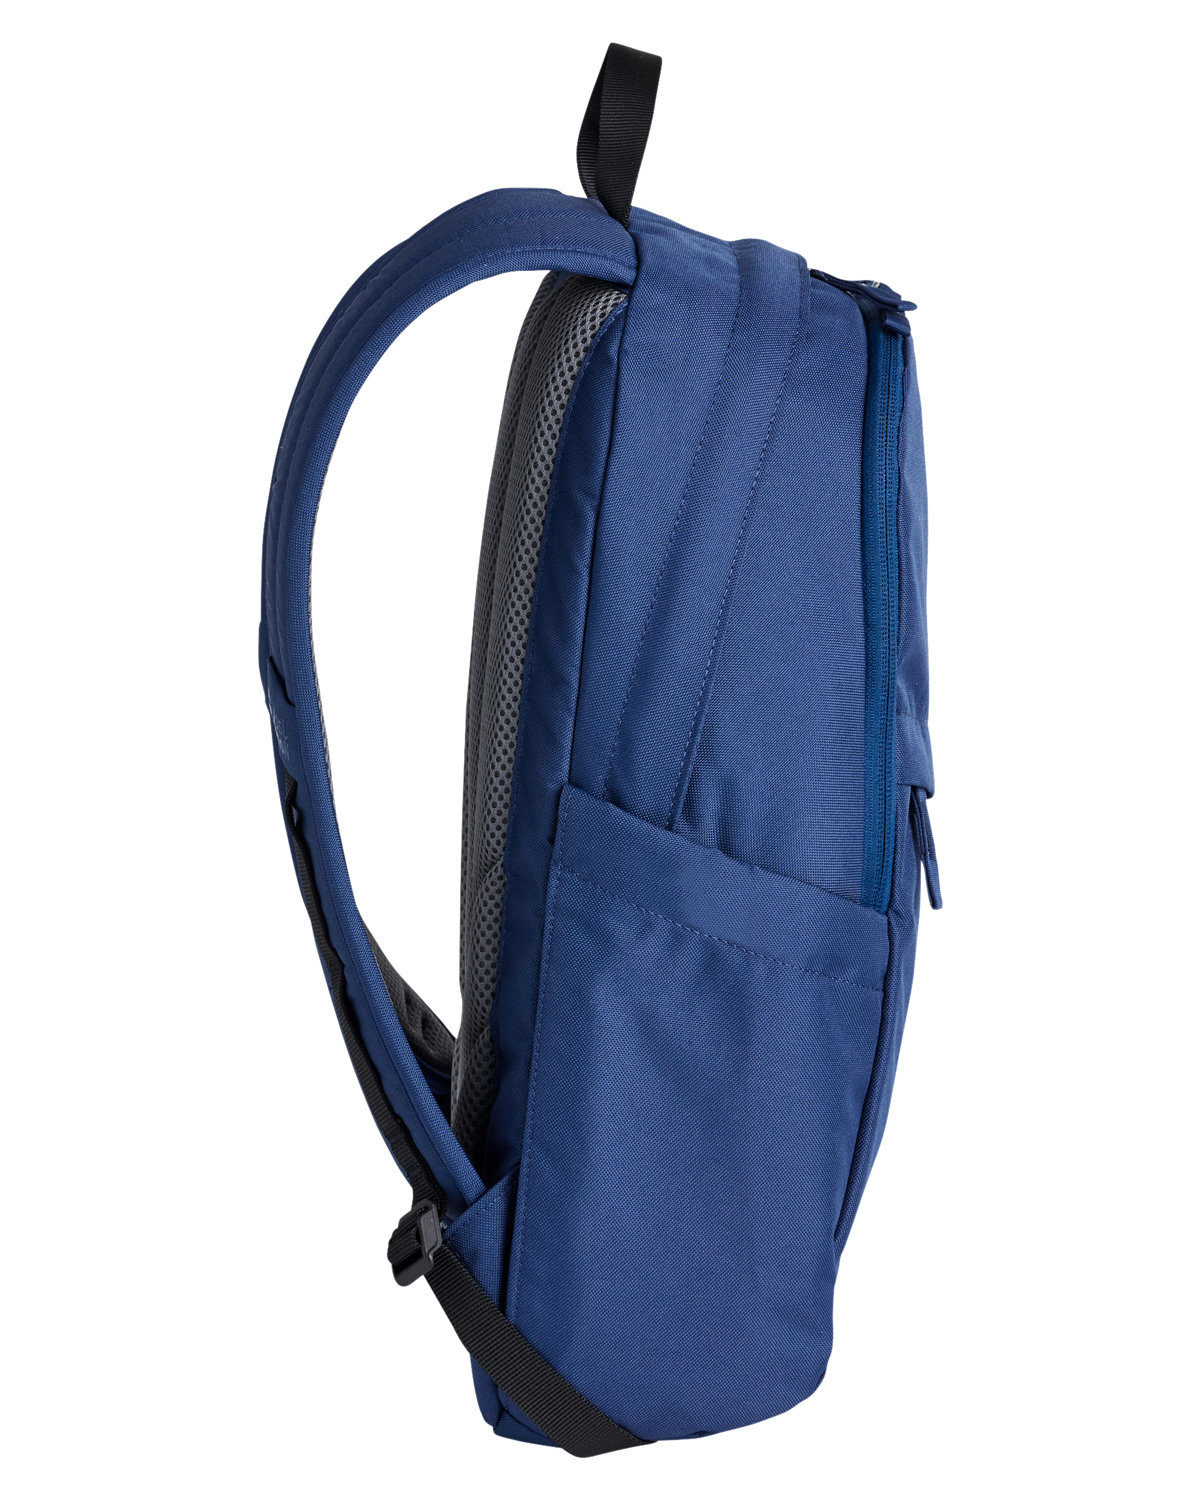 Jack Wolfskin Perfect Day Backpack | alphabroder